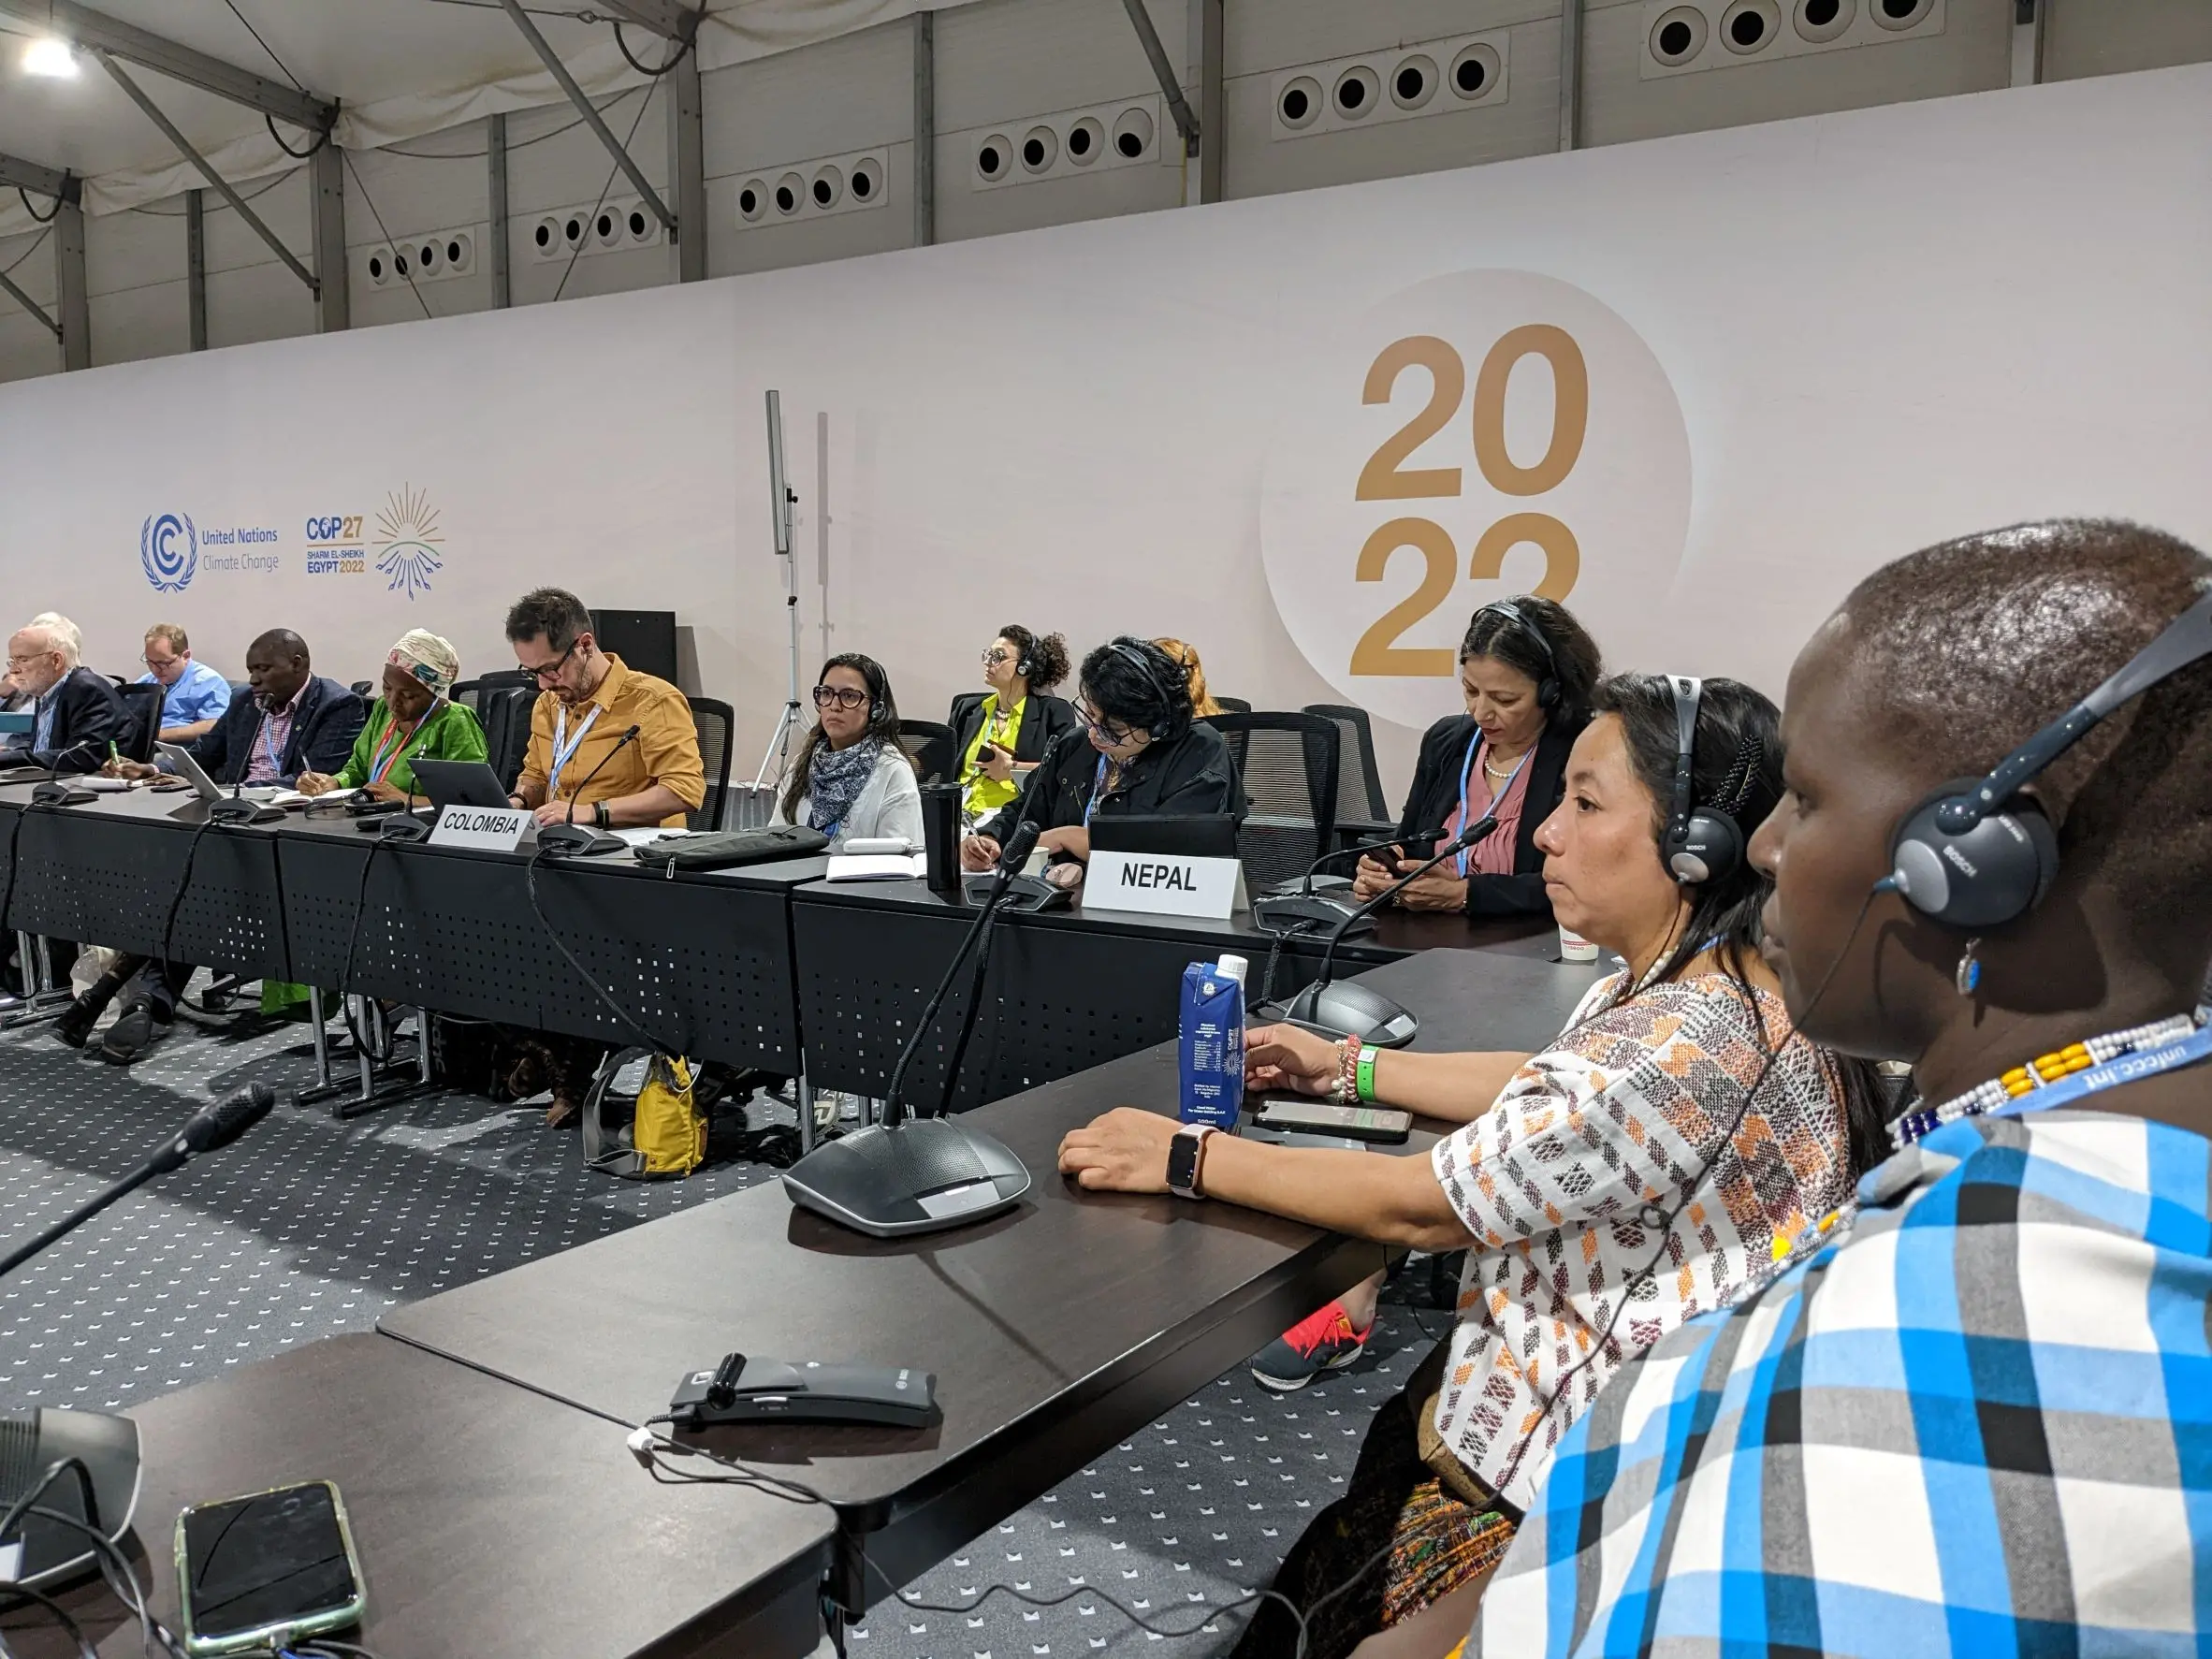 Neema Lekule, UCRT, and Sara Bo Che, Tikonel, attend and take part in discussions and negotiations on gender and climate change during UNFCCC COP 27 in Sharm el Sheik